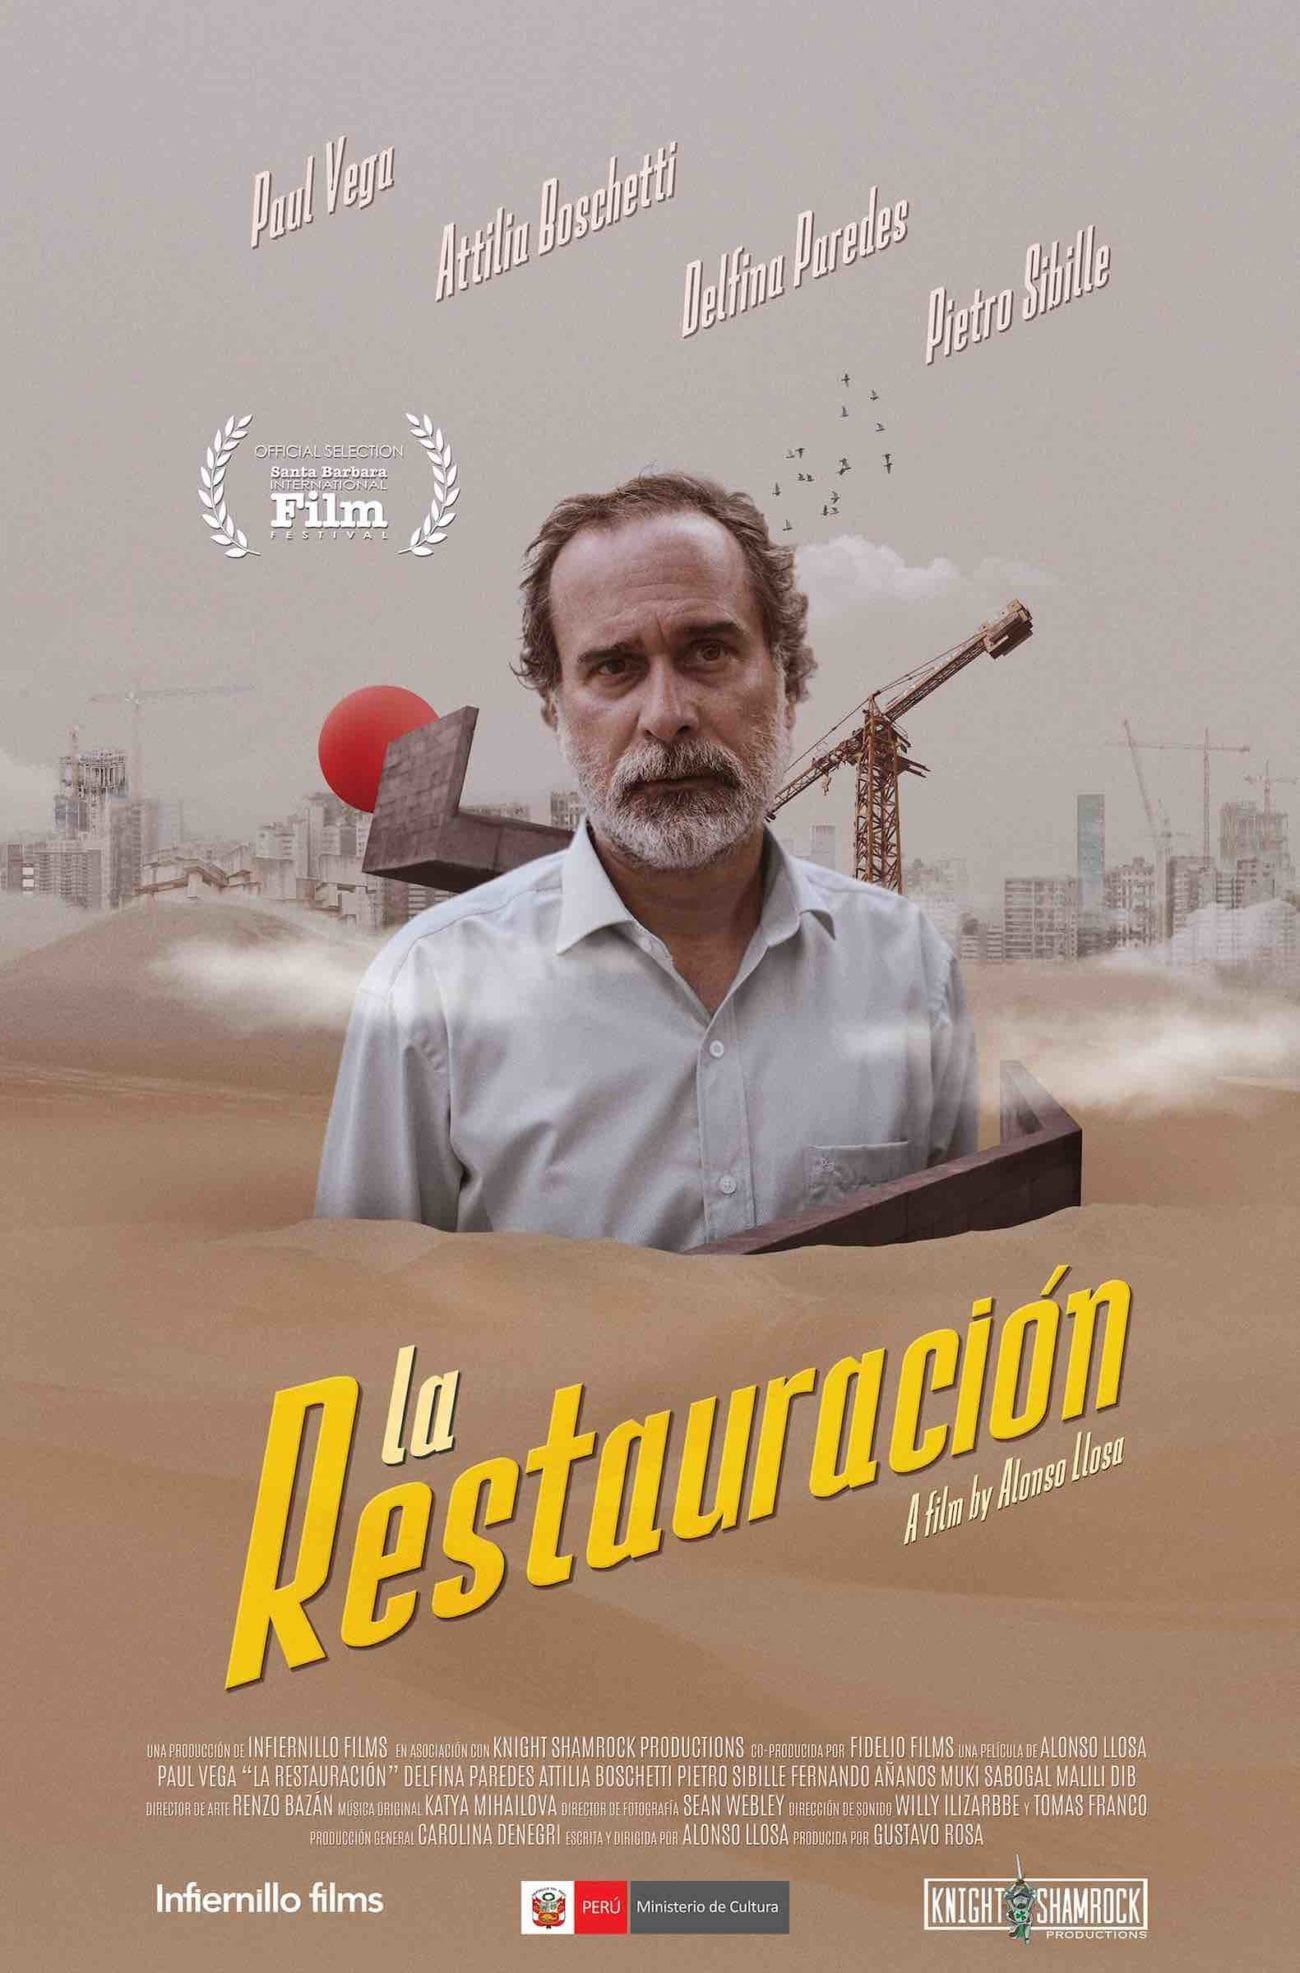 Alonso Llosa will be making his directorial debut at SBIFF this weekend with the world premiere of La Restauración. Here's our interview with Llosa.